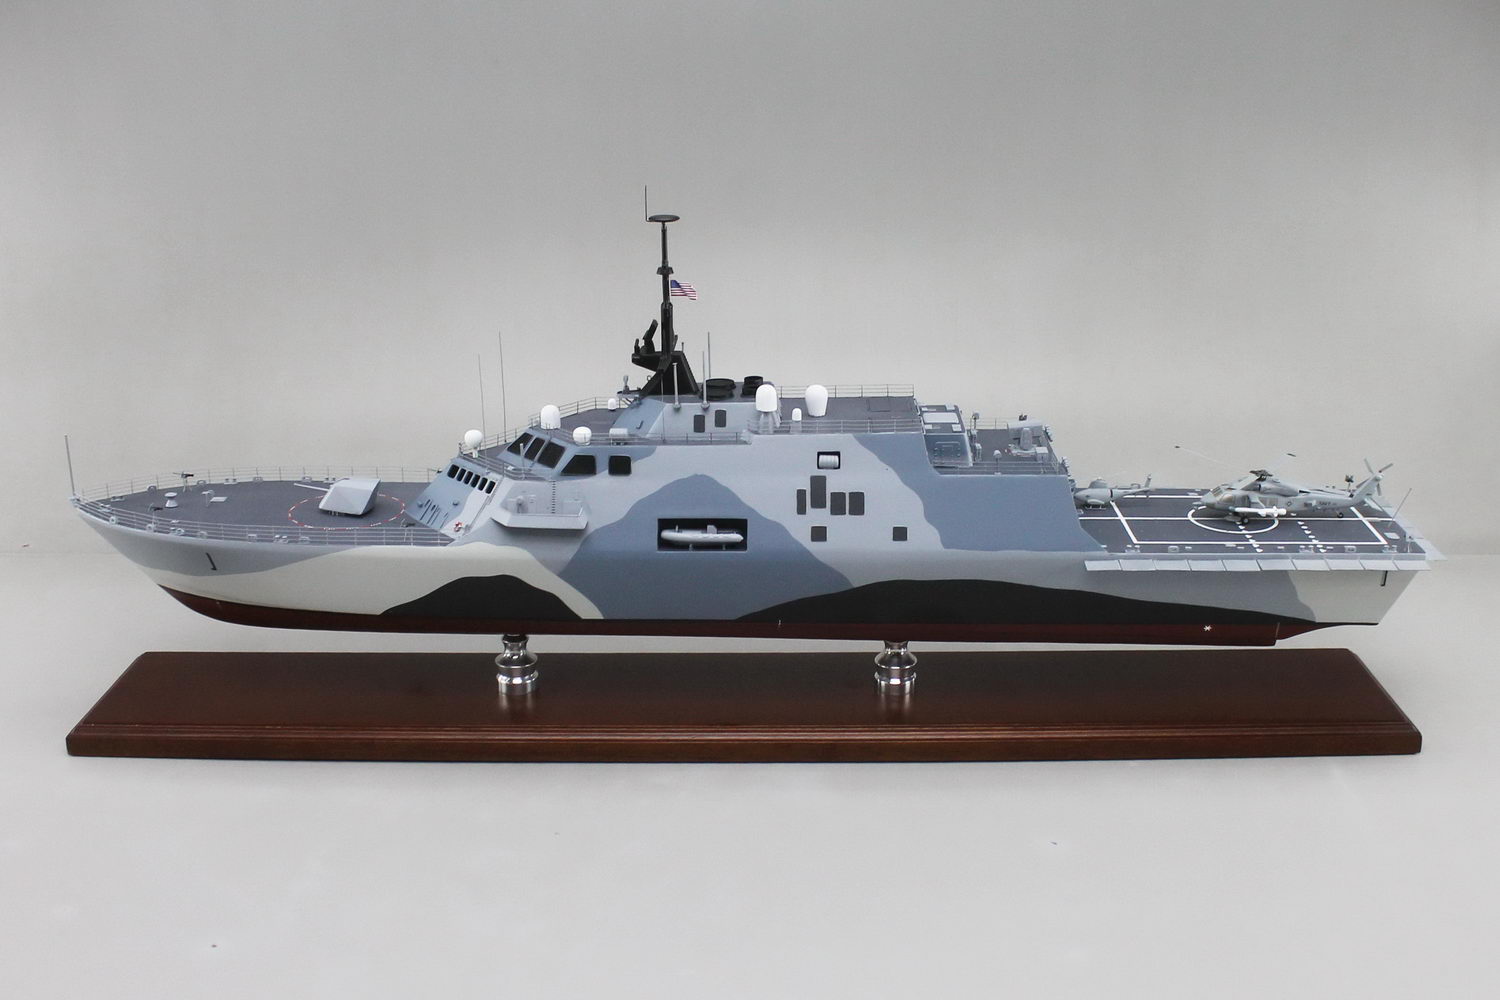 Master Model 1:700 Independence Class of Littoral Combat Ships #SM700052 